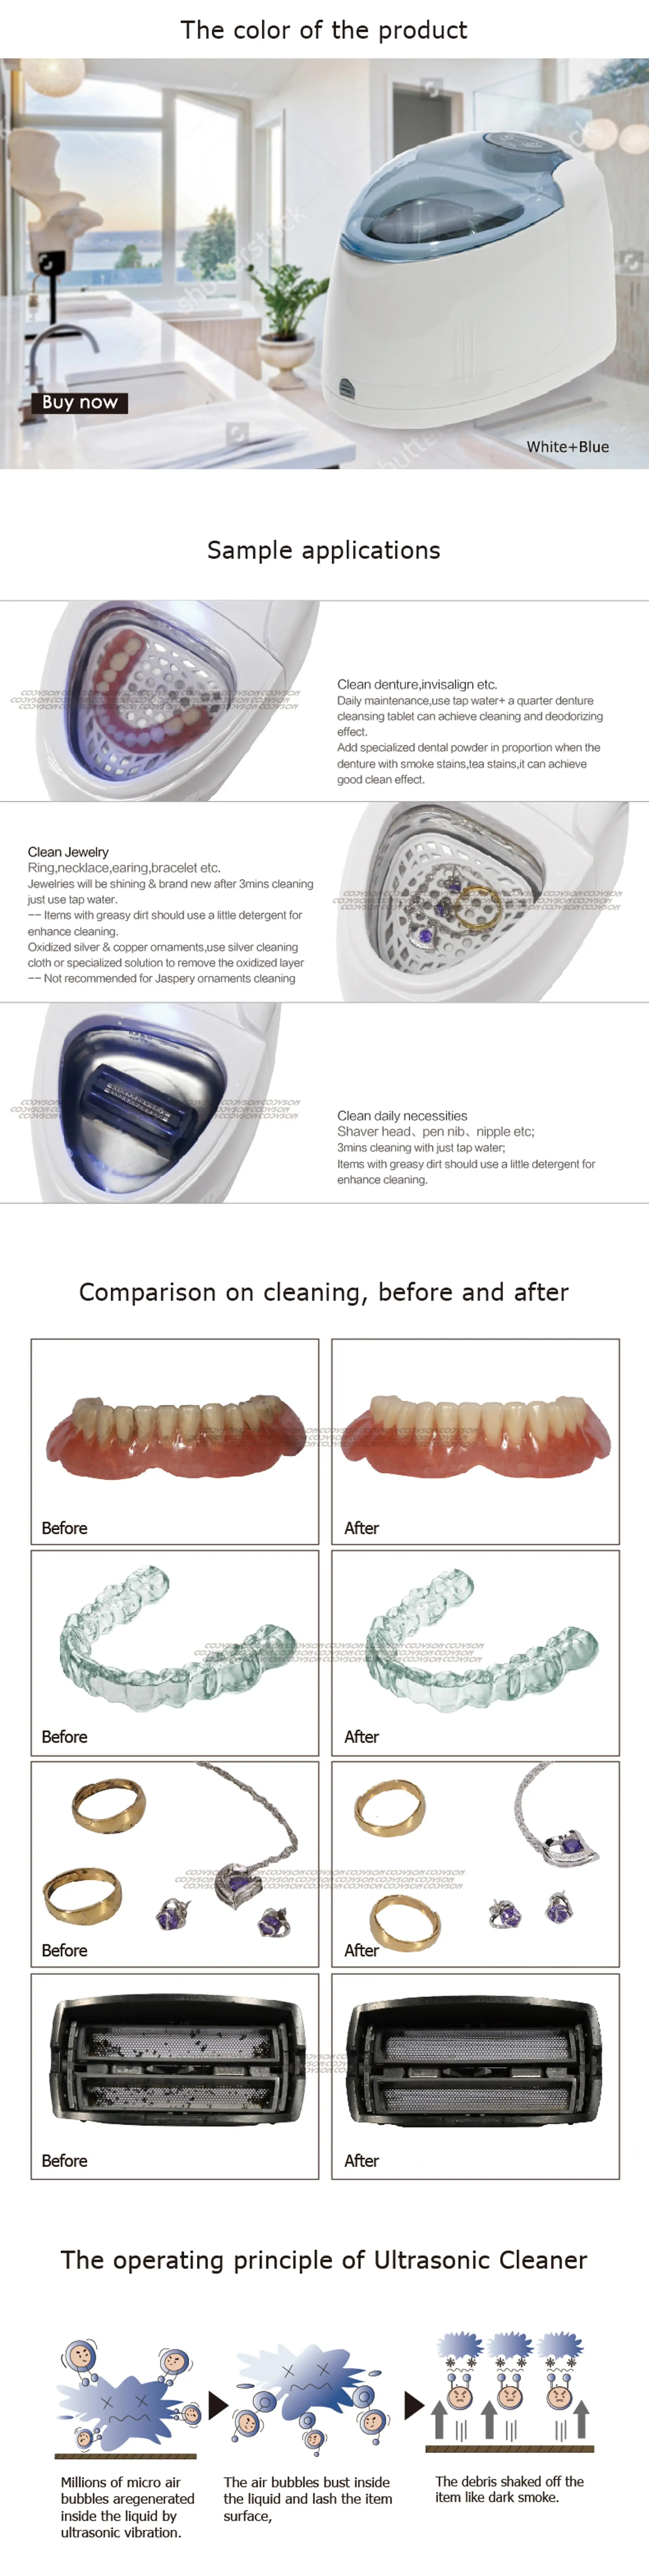 CD-3900 Hot Sale Professional Mini Ultrasonic Denture Cleaner for Dental, toothbrush, jewelry with CE, RoHs